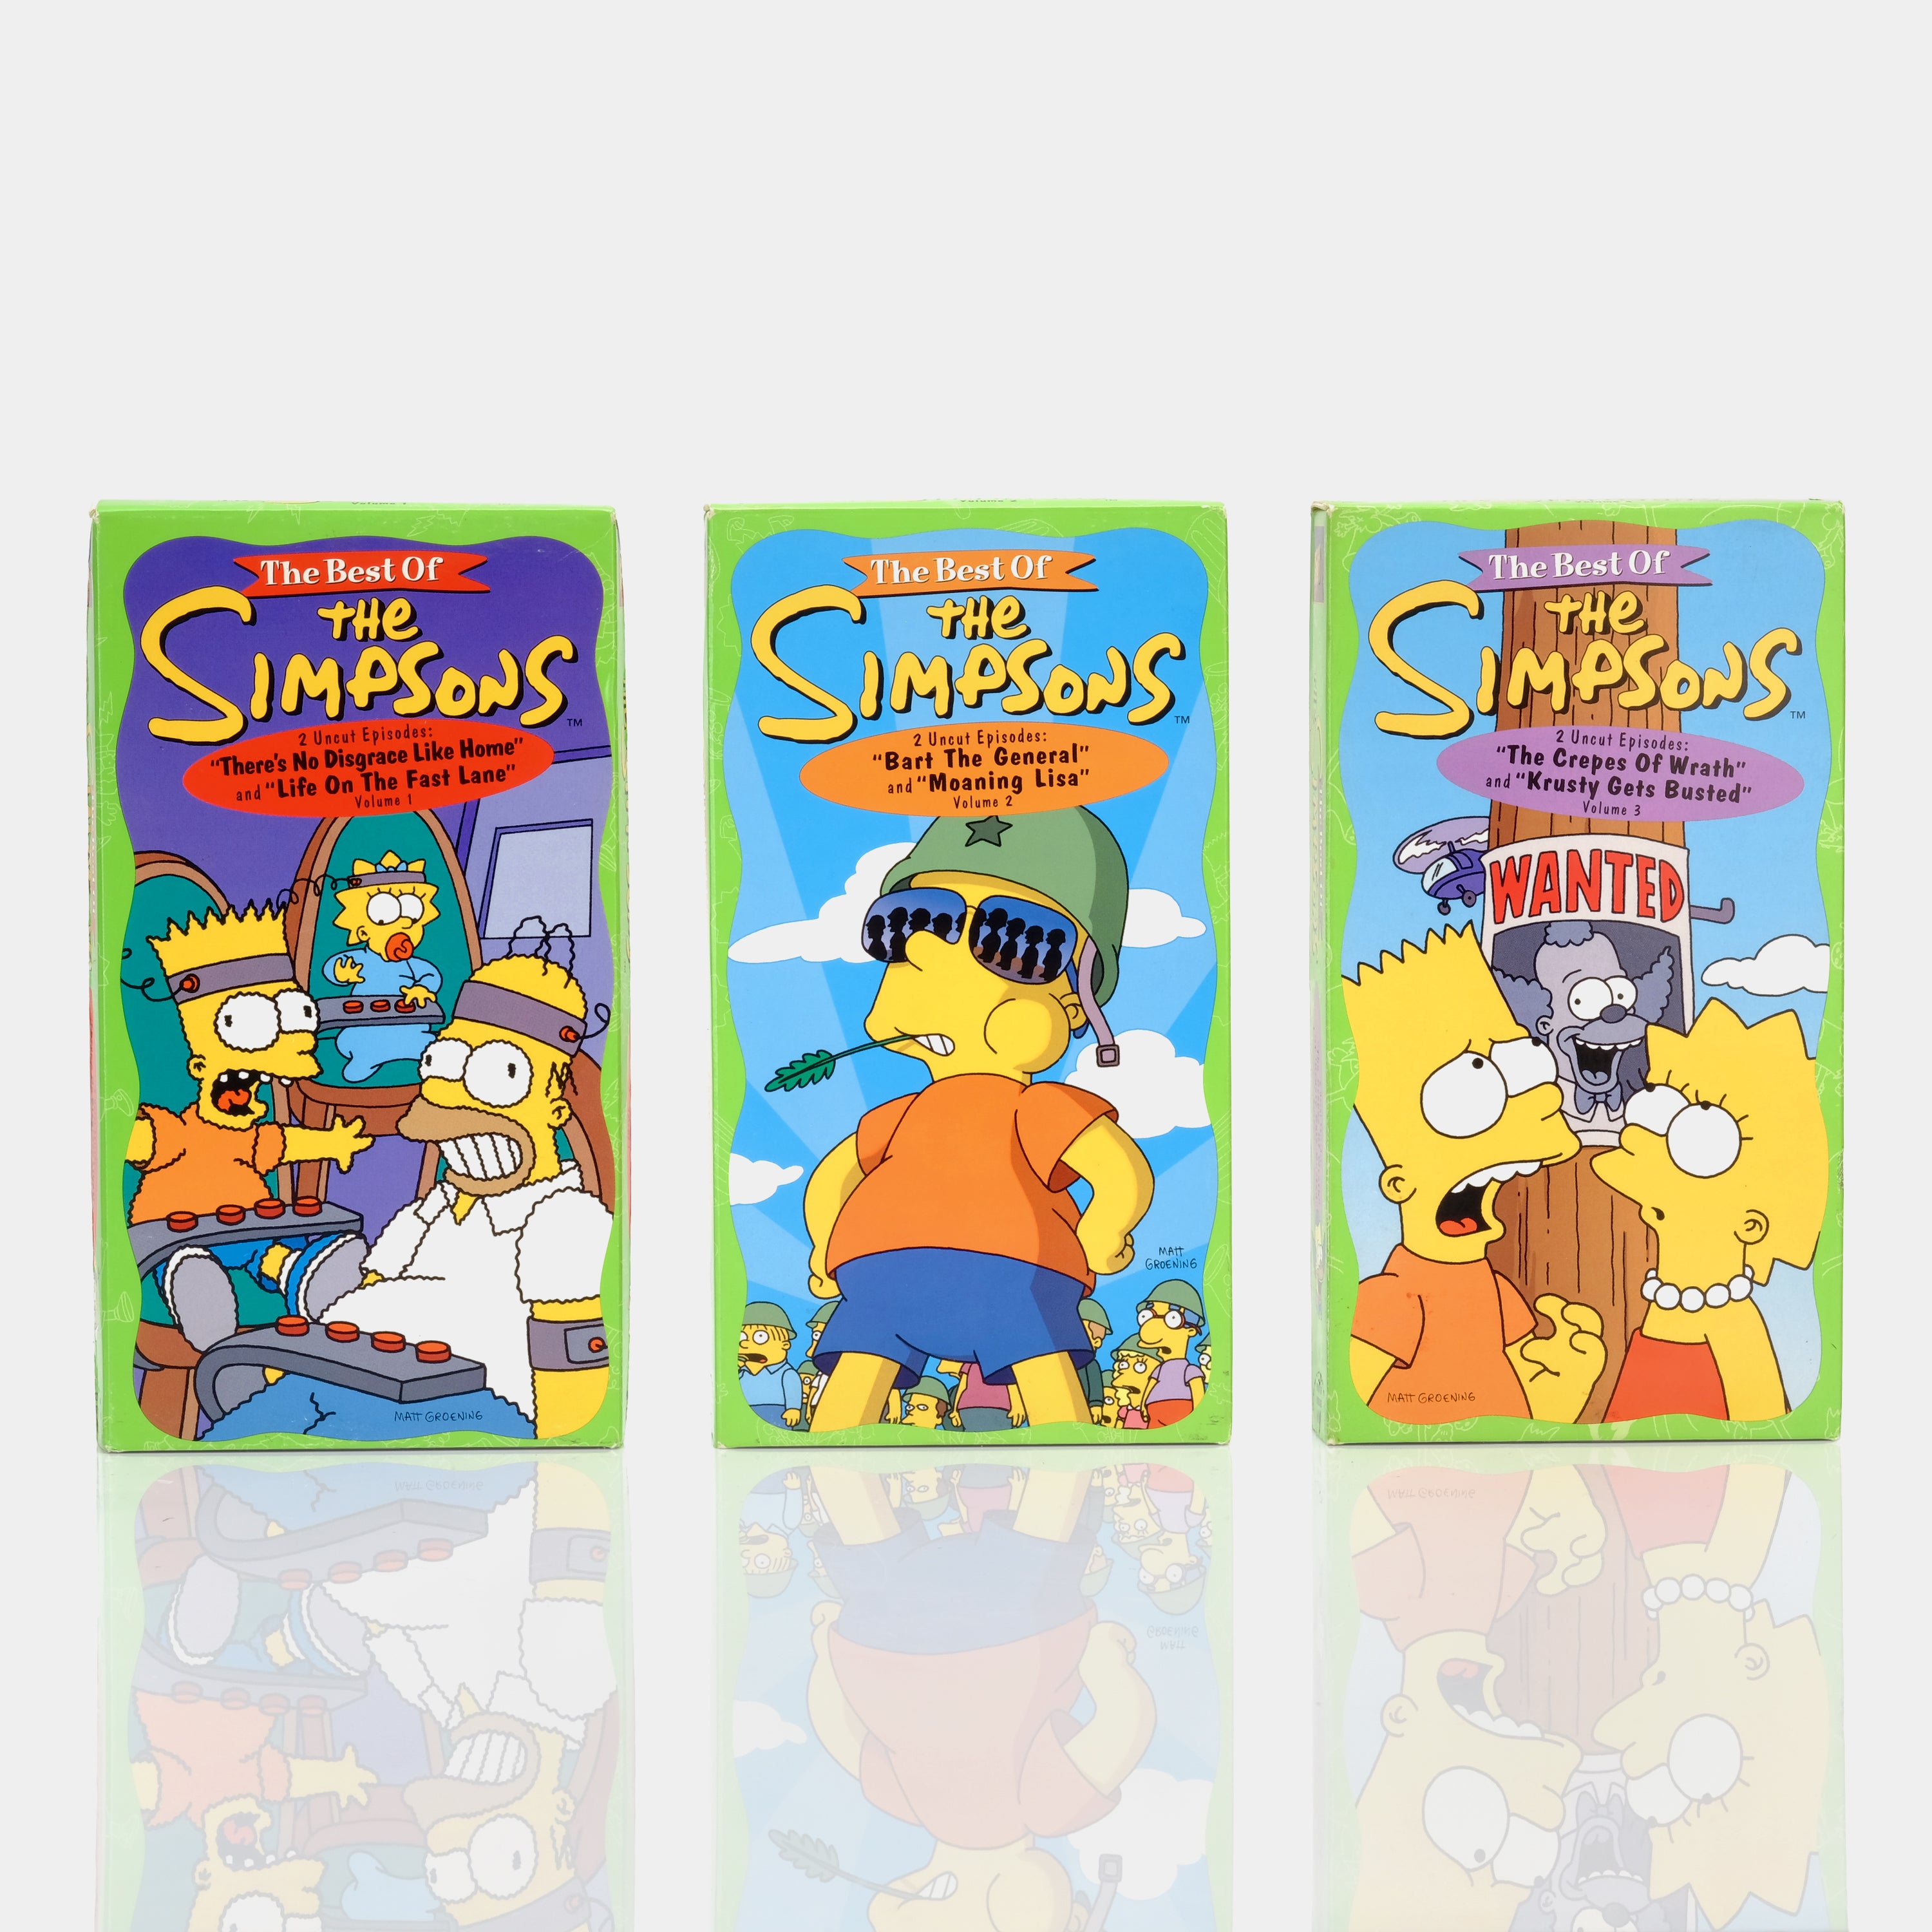 The Best Of The Simpsons VHS Tape Set